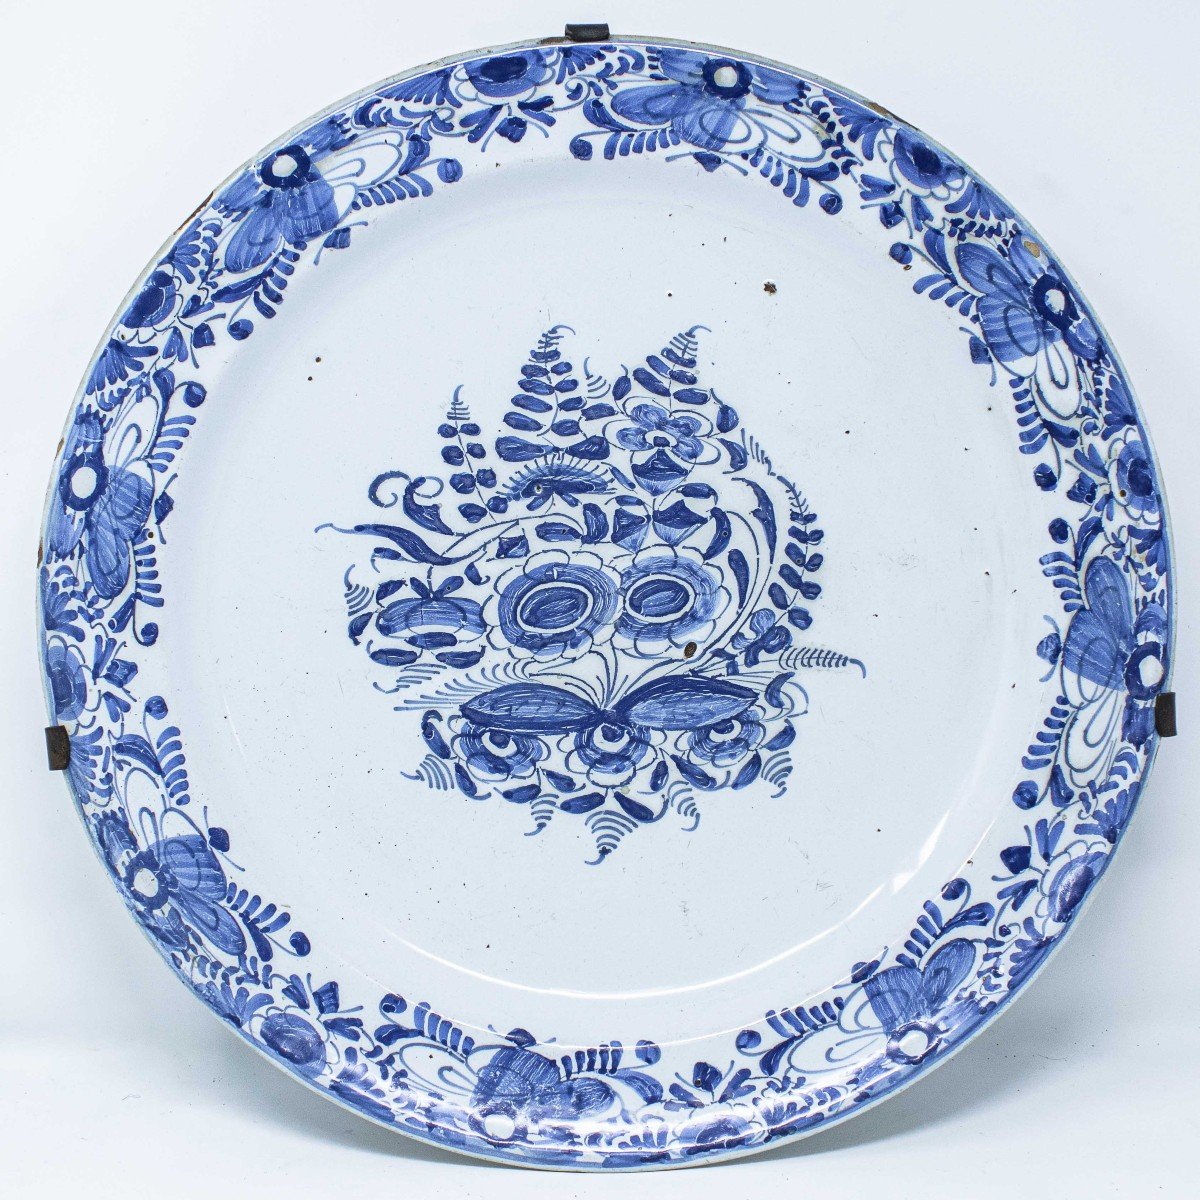 Manufacture Antonibon From The 18th Century, Dish